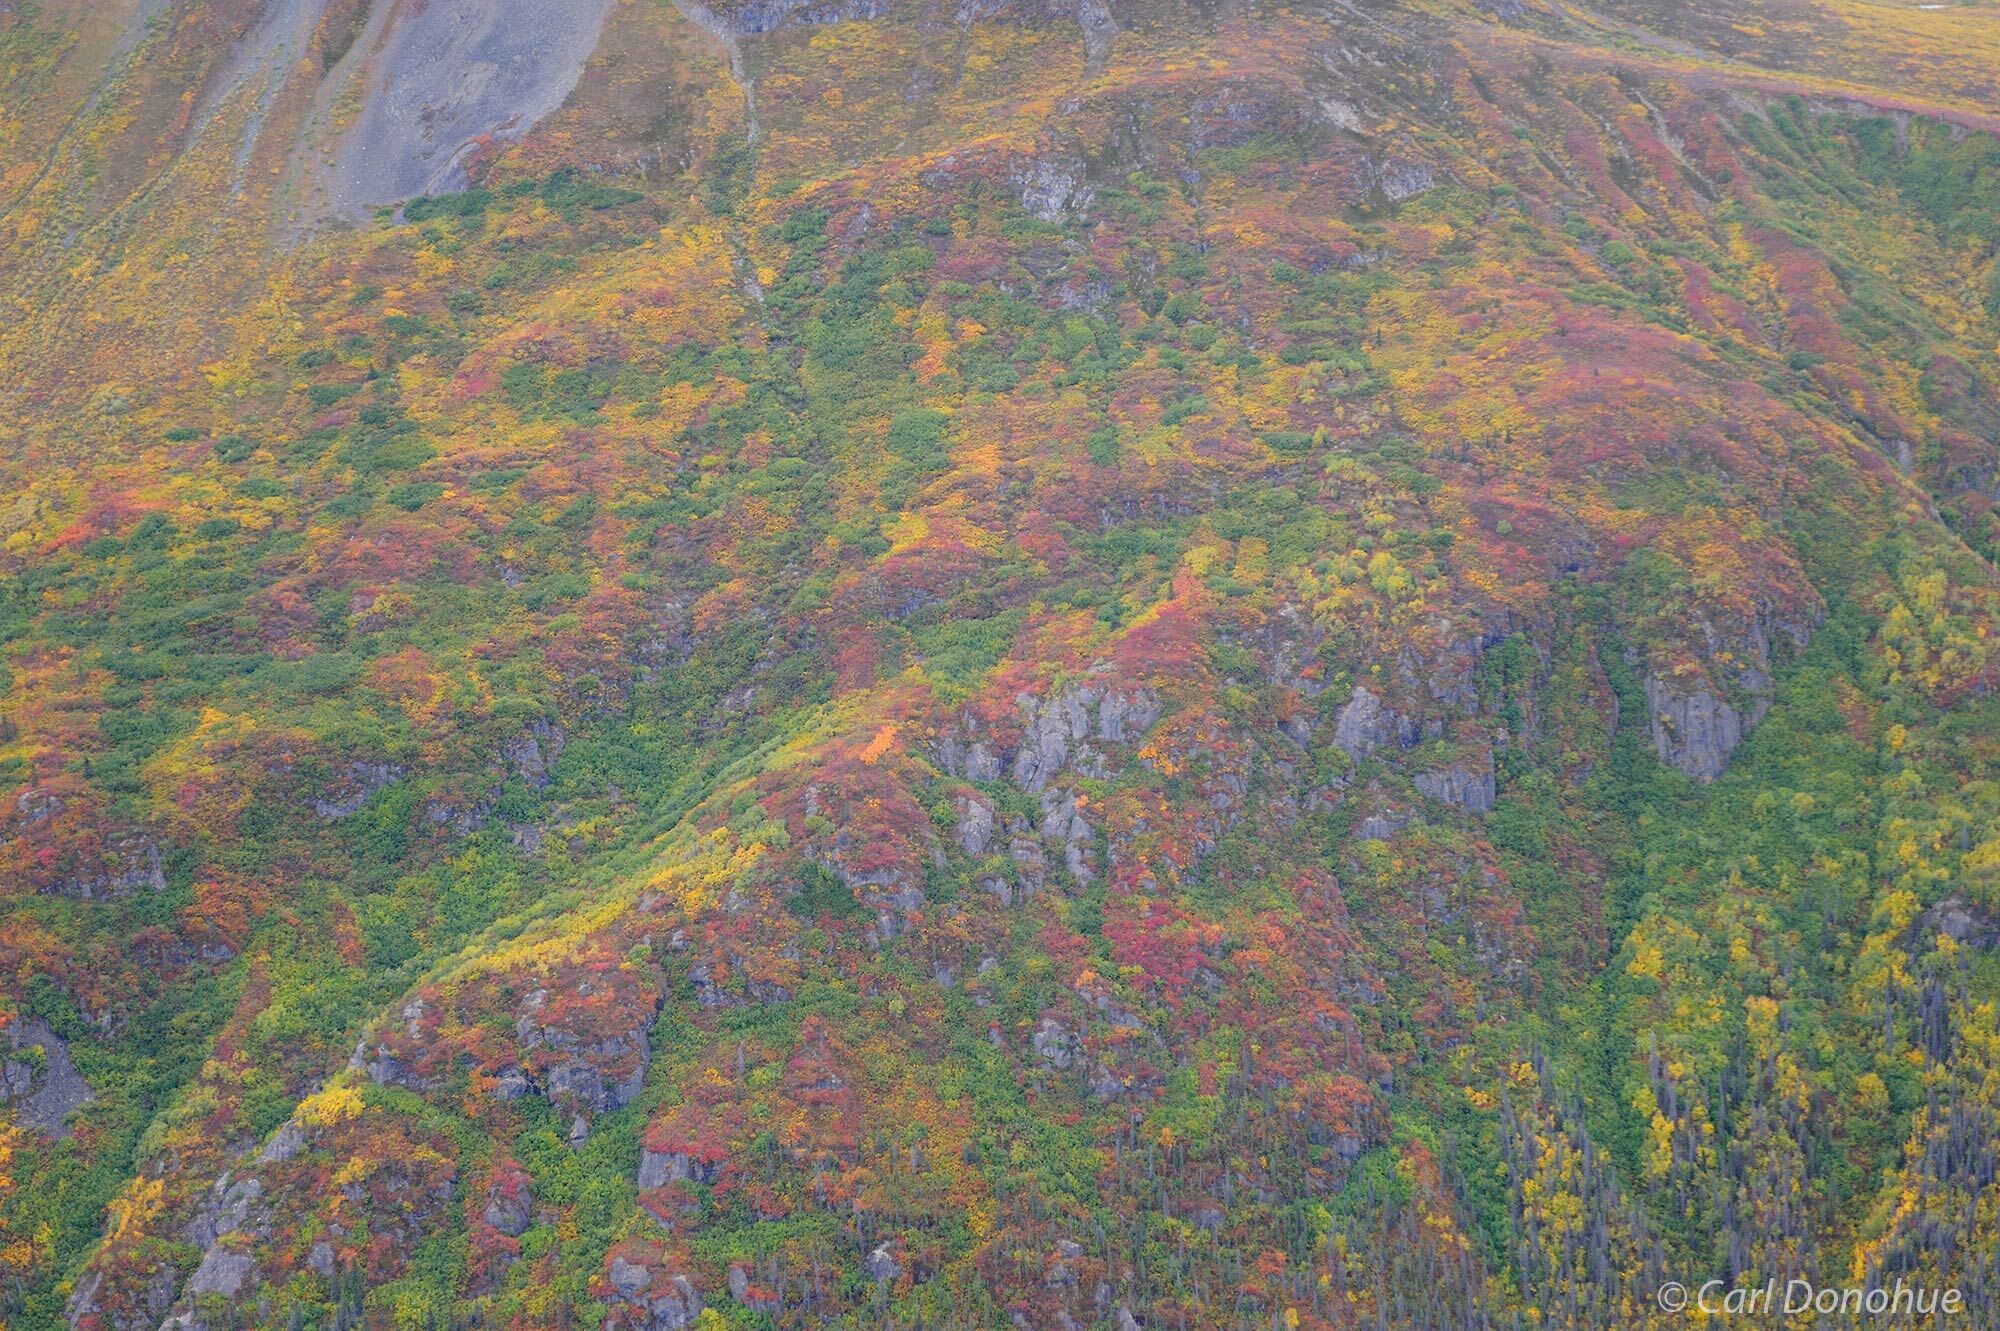 Fall colors line the mountainside in the eastern Chugach Mountains near Tana River, Wrangell-St. Elias National Park and Preserve...